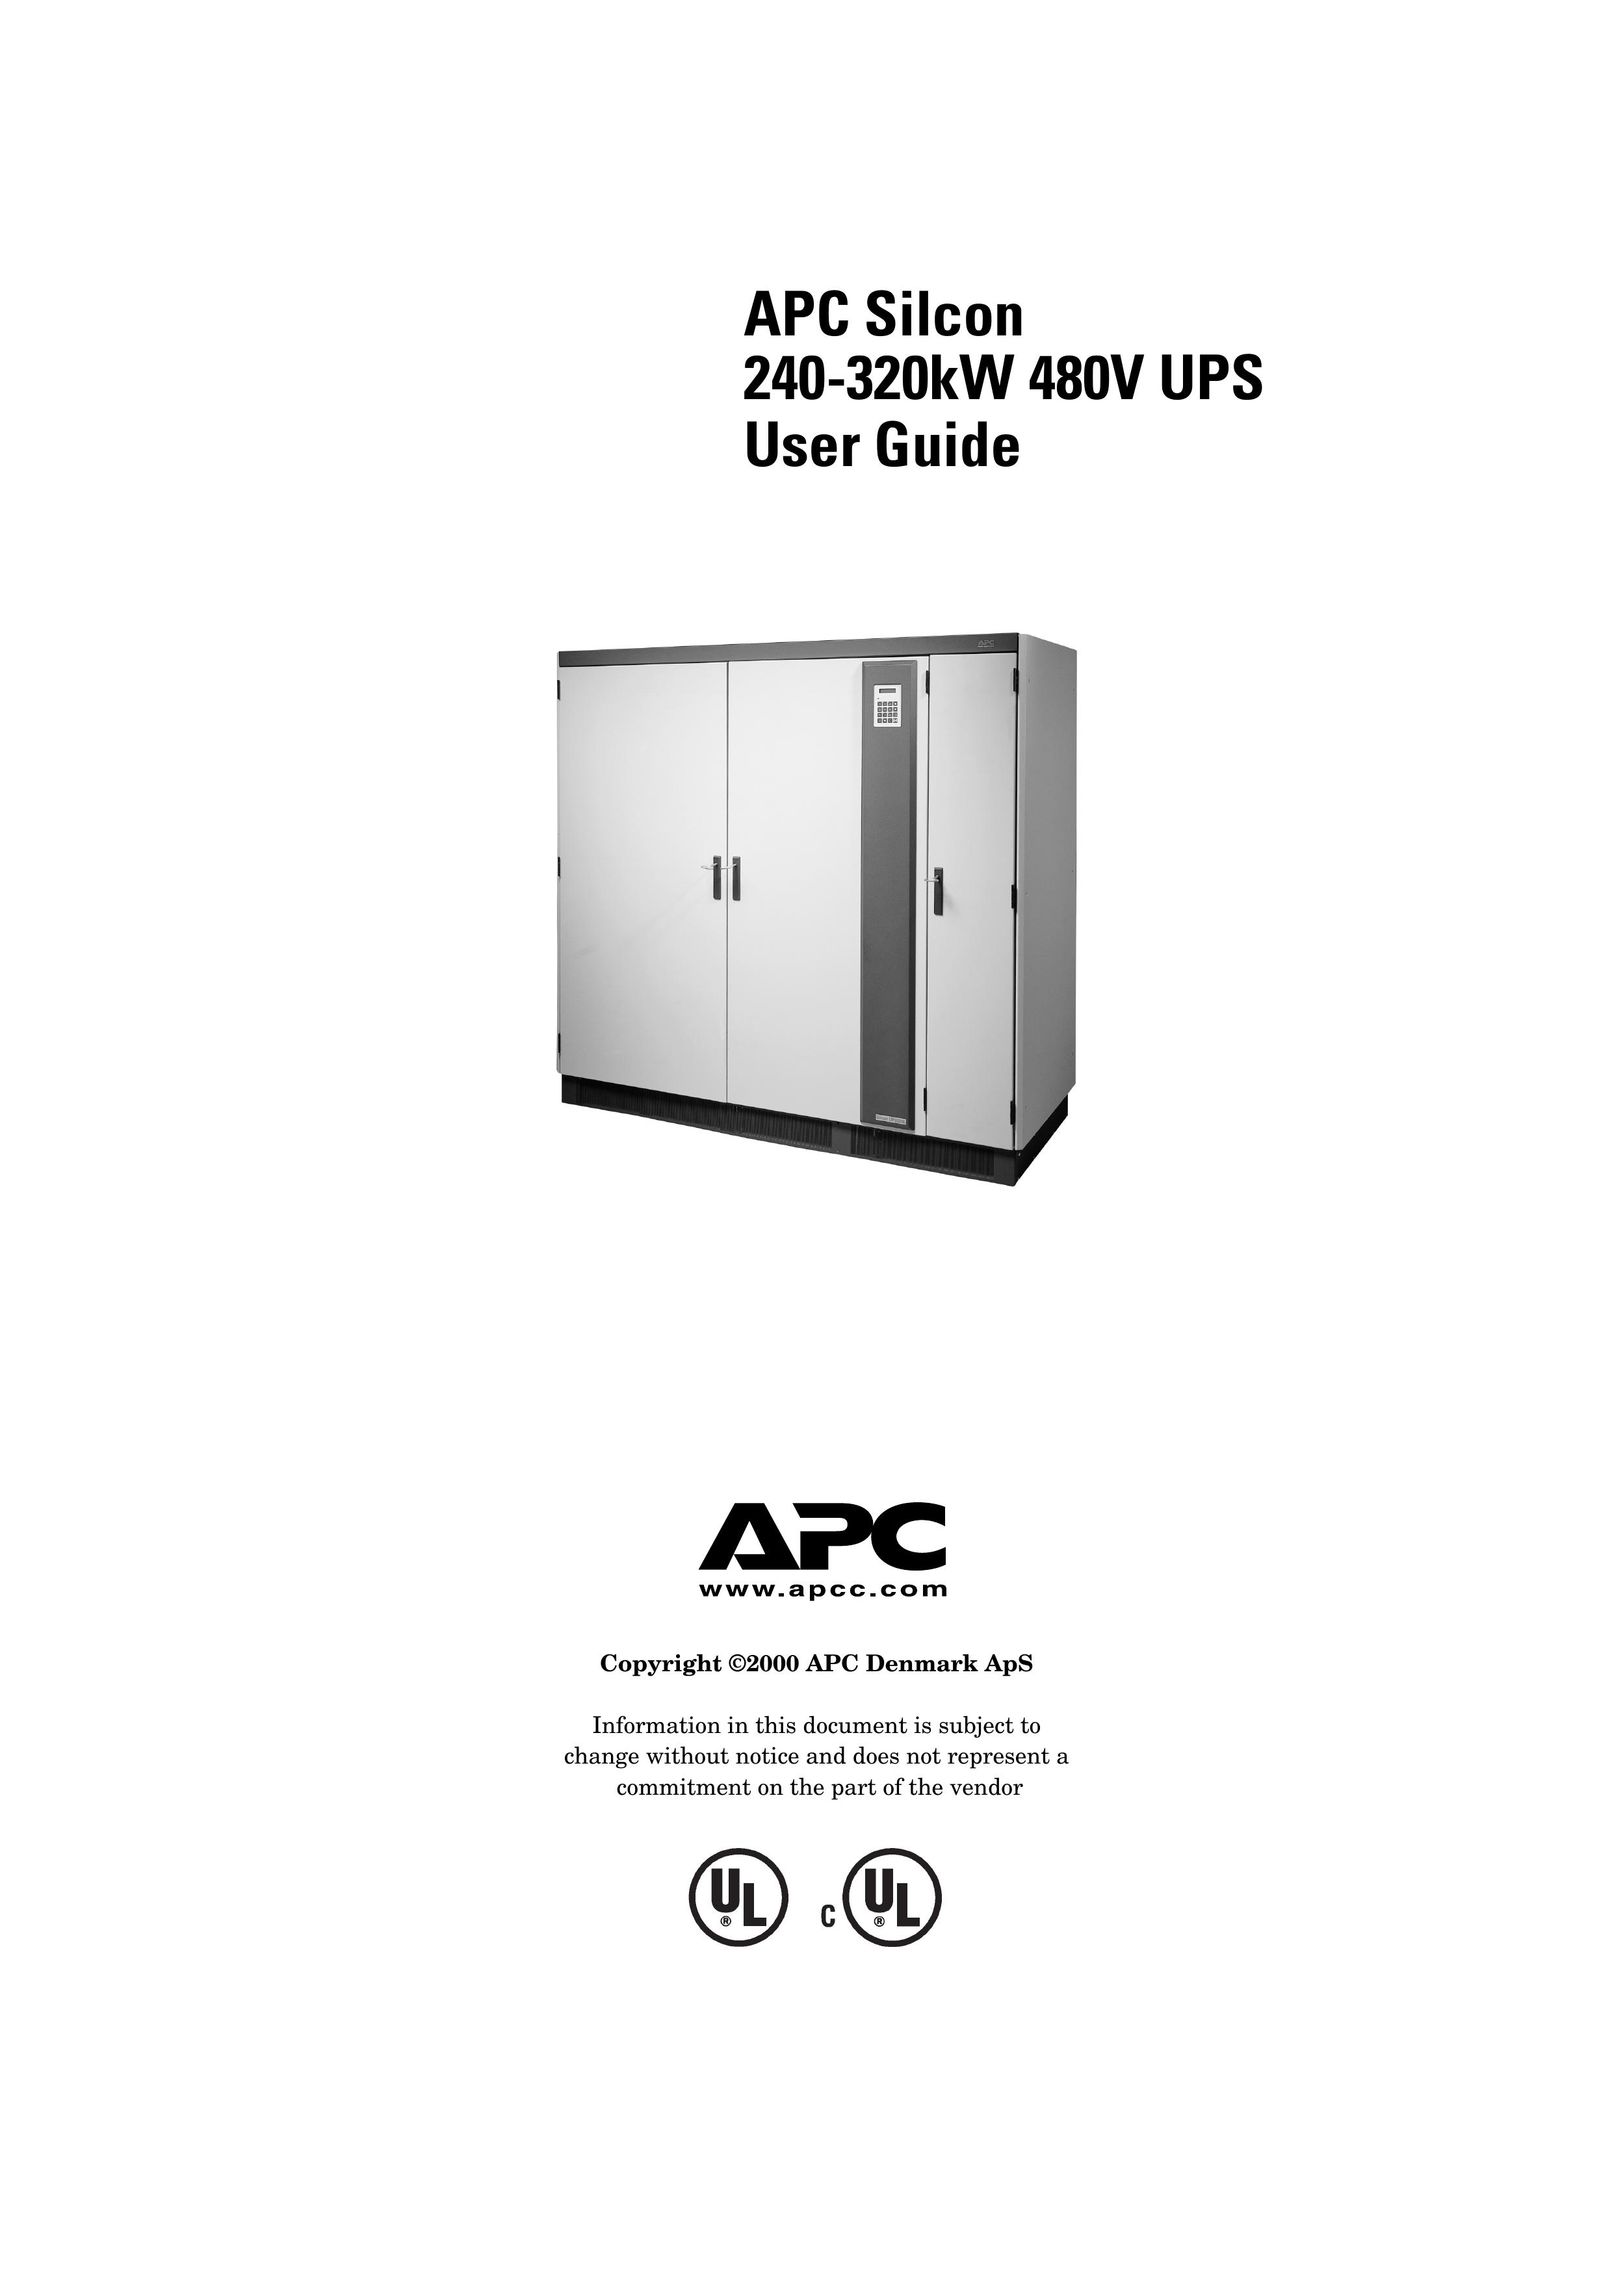 American Power Conversion 240-320kW 480V Power Supply User Manual